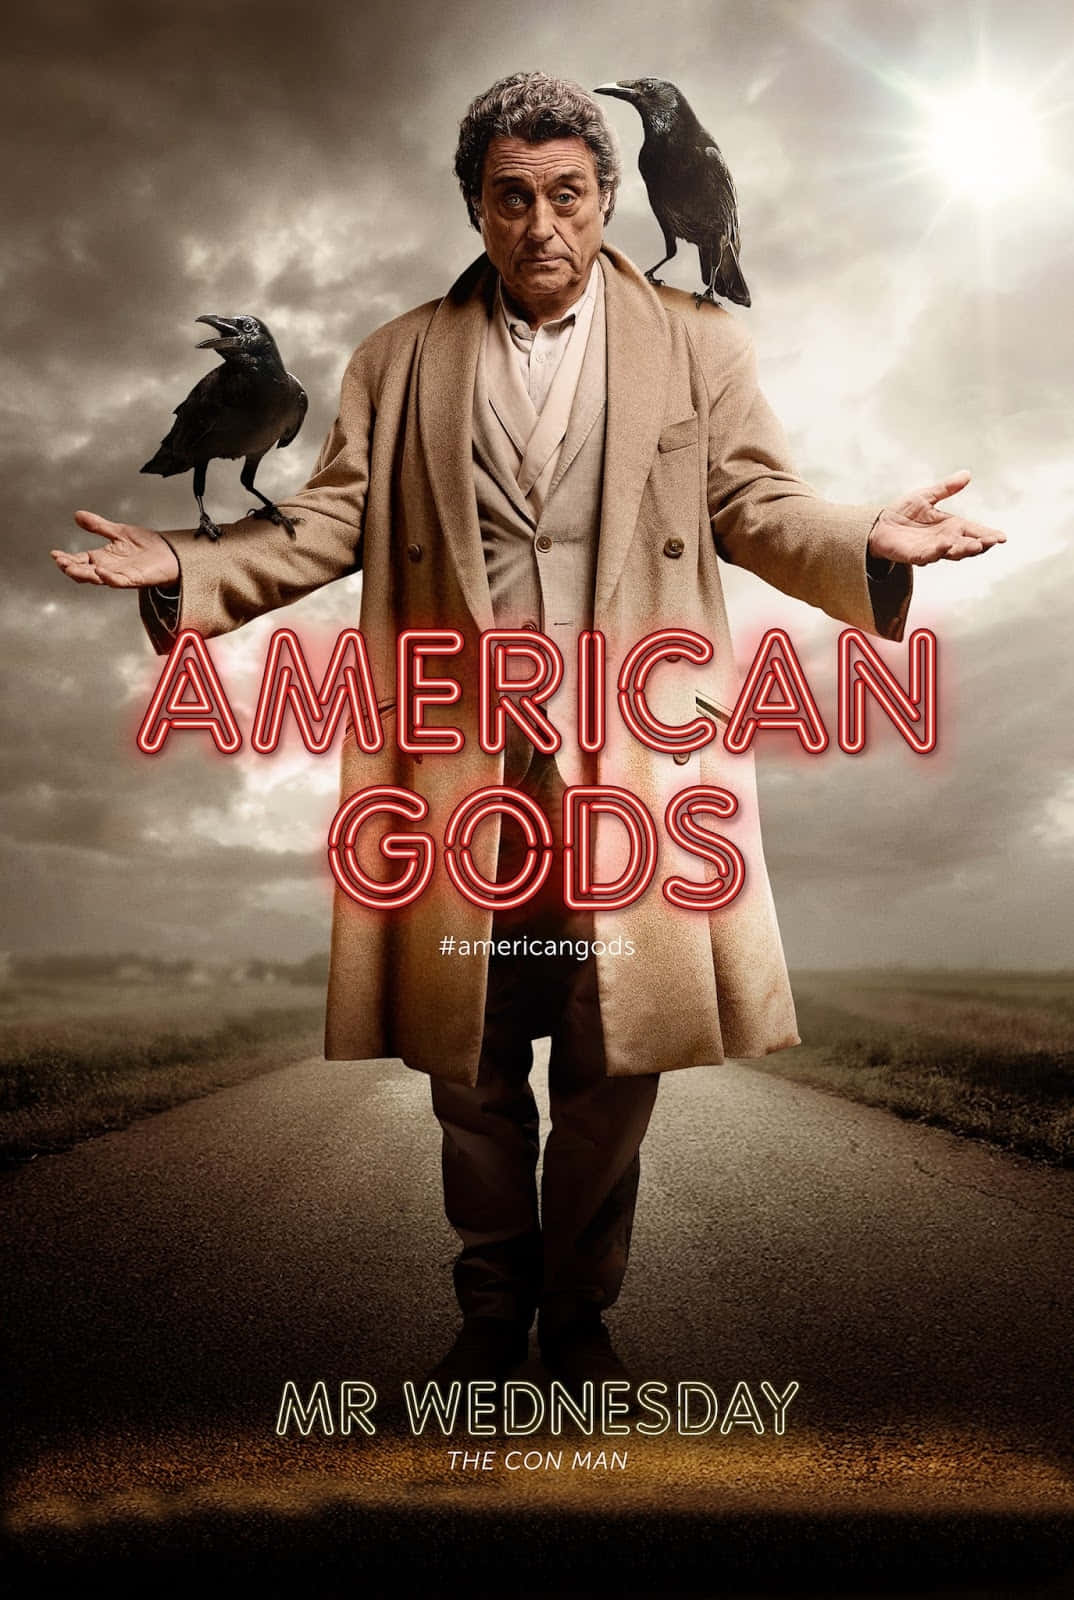 "Discover the mystical stories of American Gods"